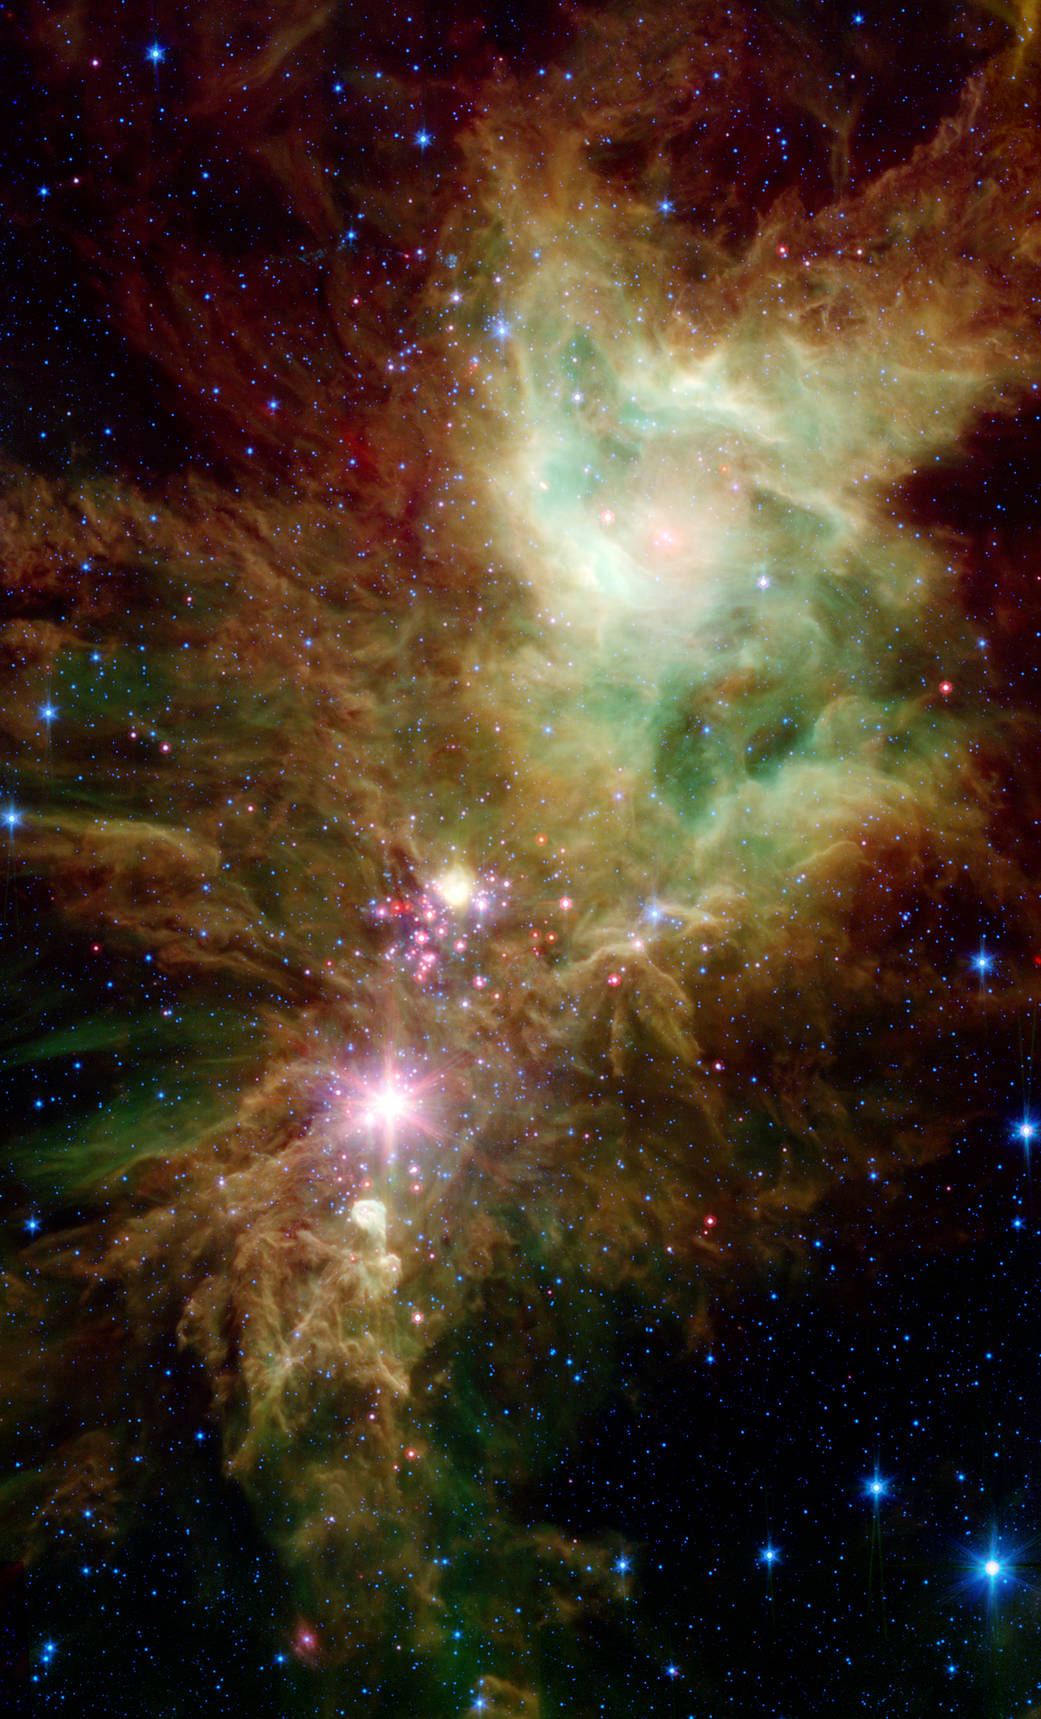 The Snowflake Cluster and the Cone Nebula